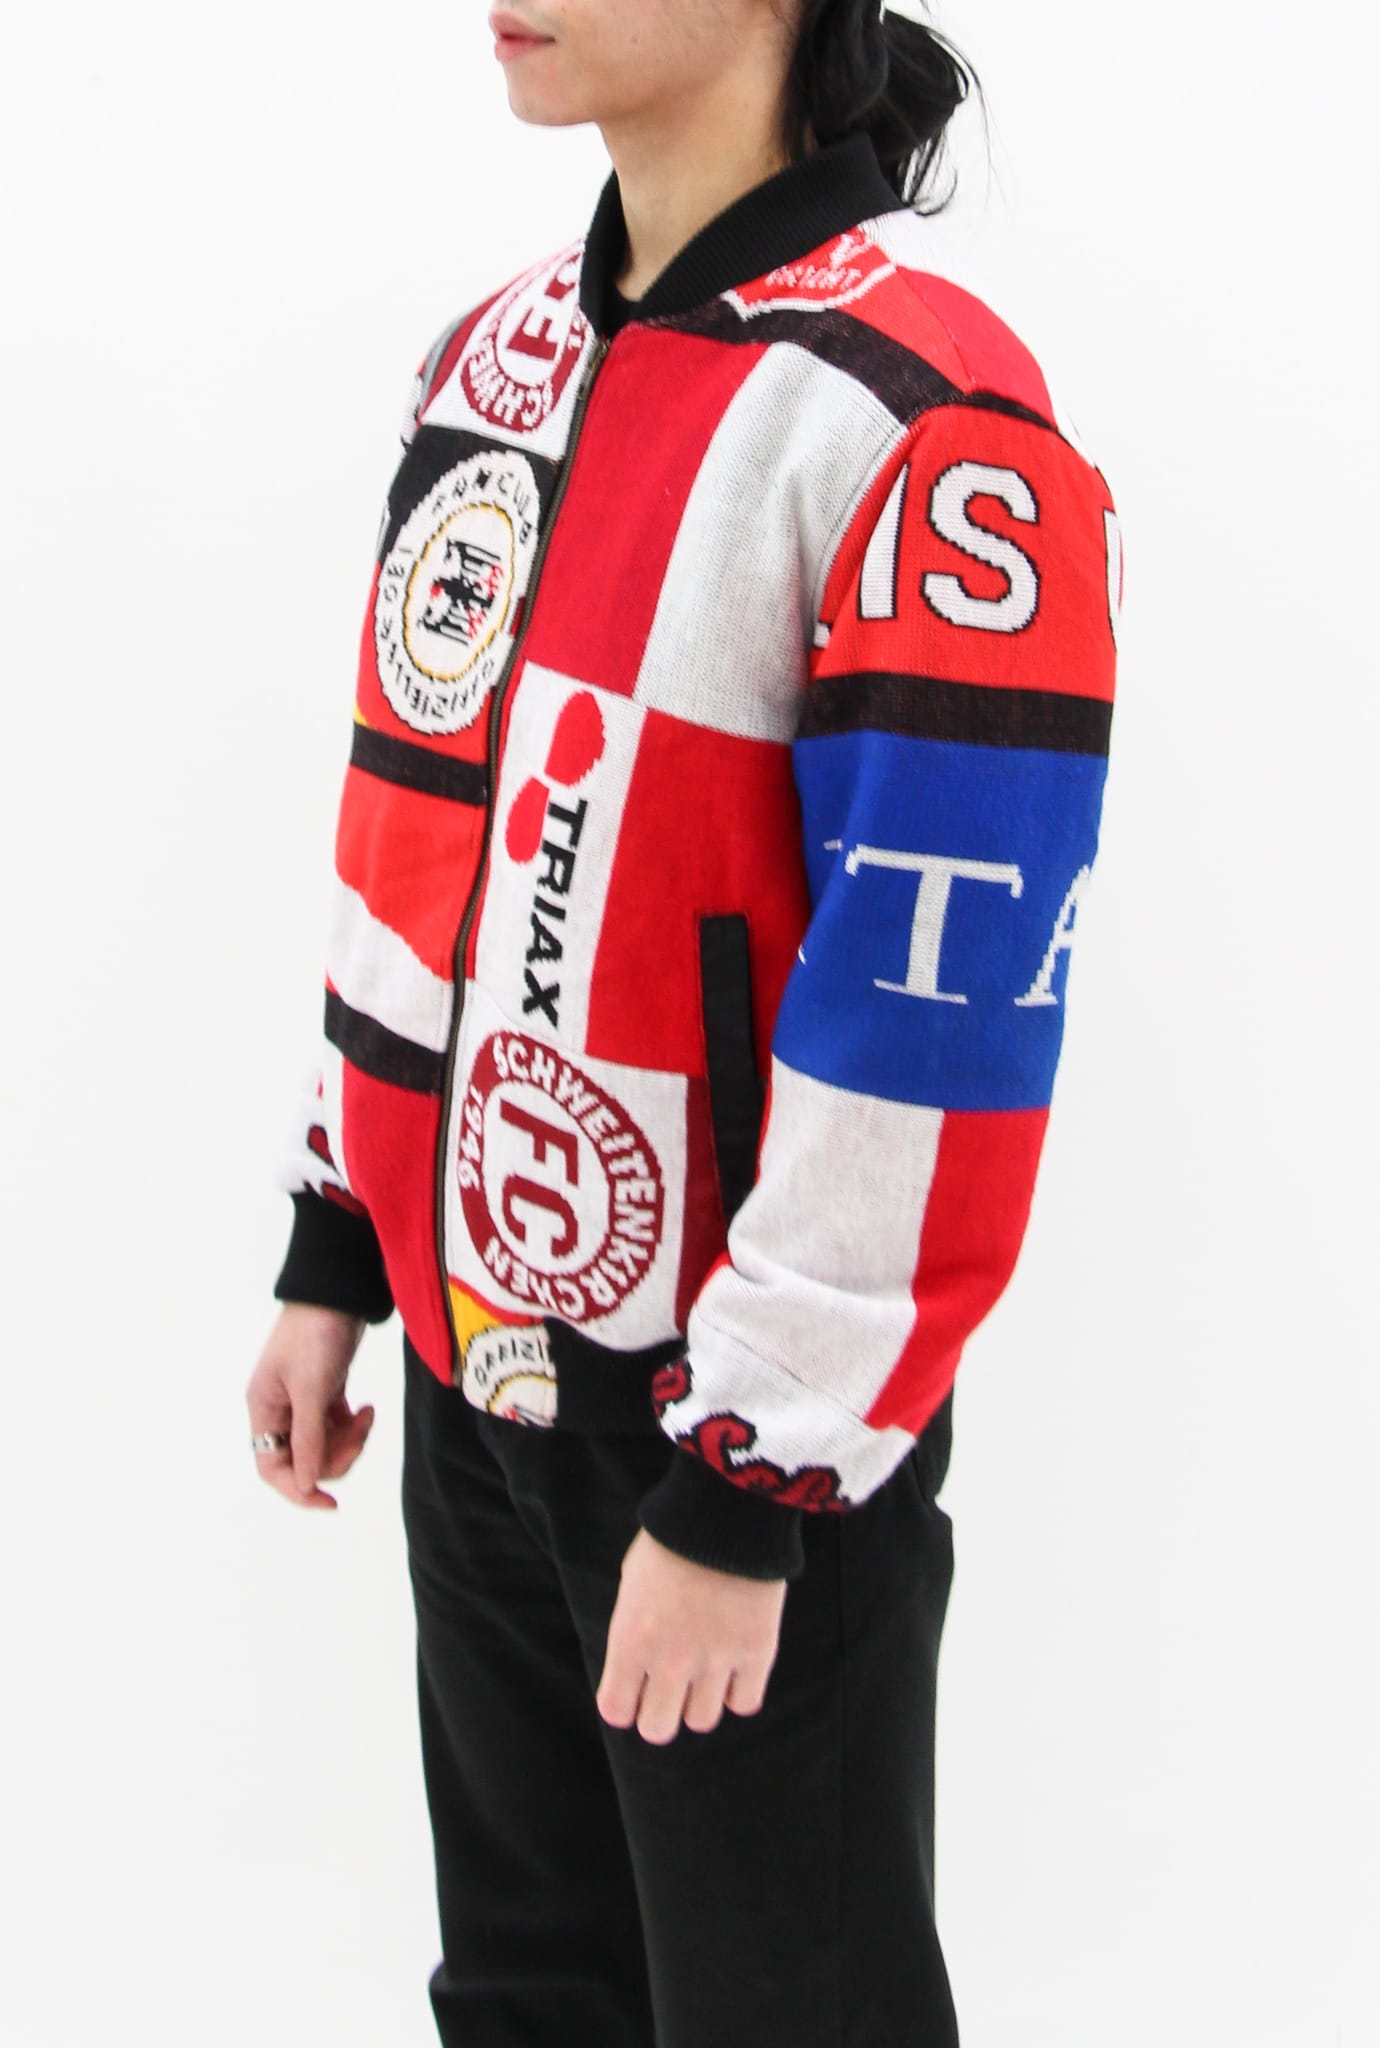 AM Re-Worked Football Scarf Jacket #47 - American Madness